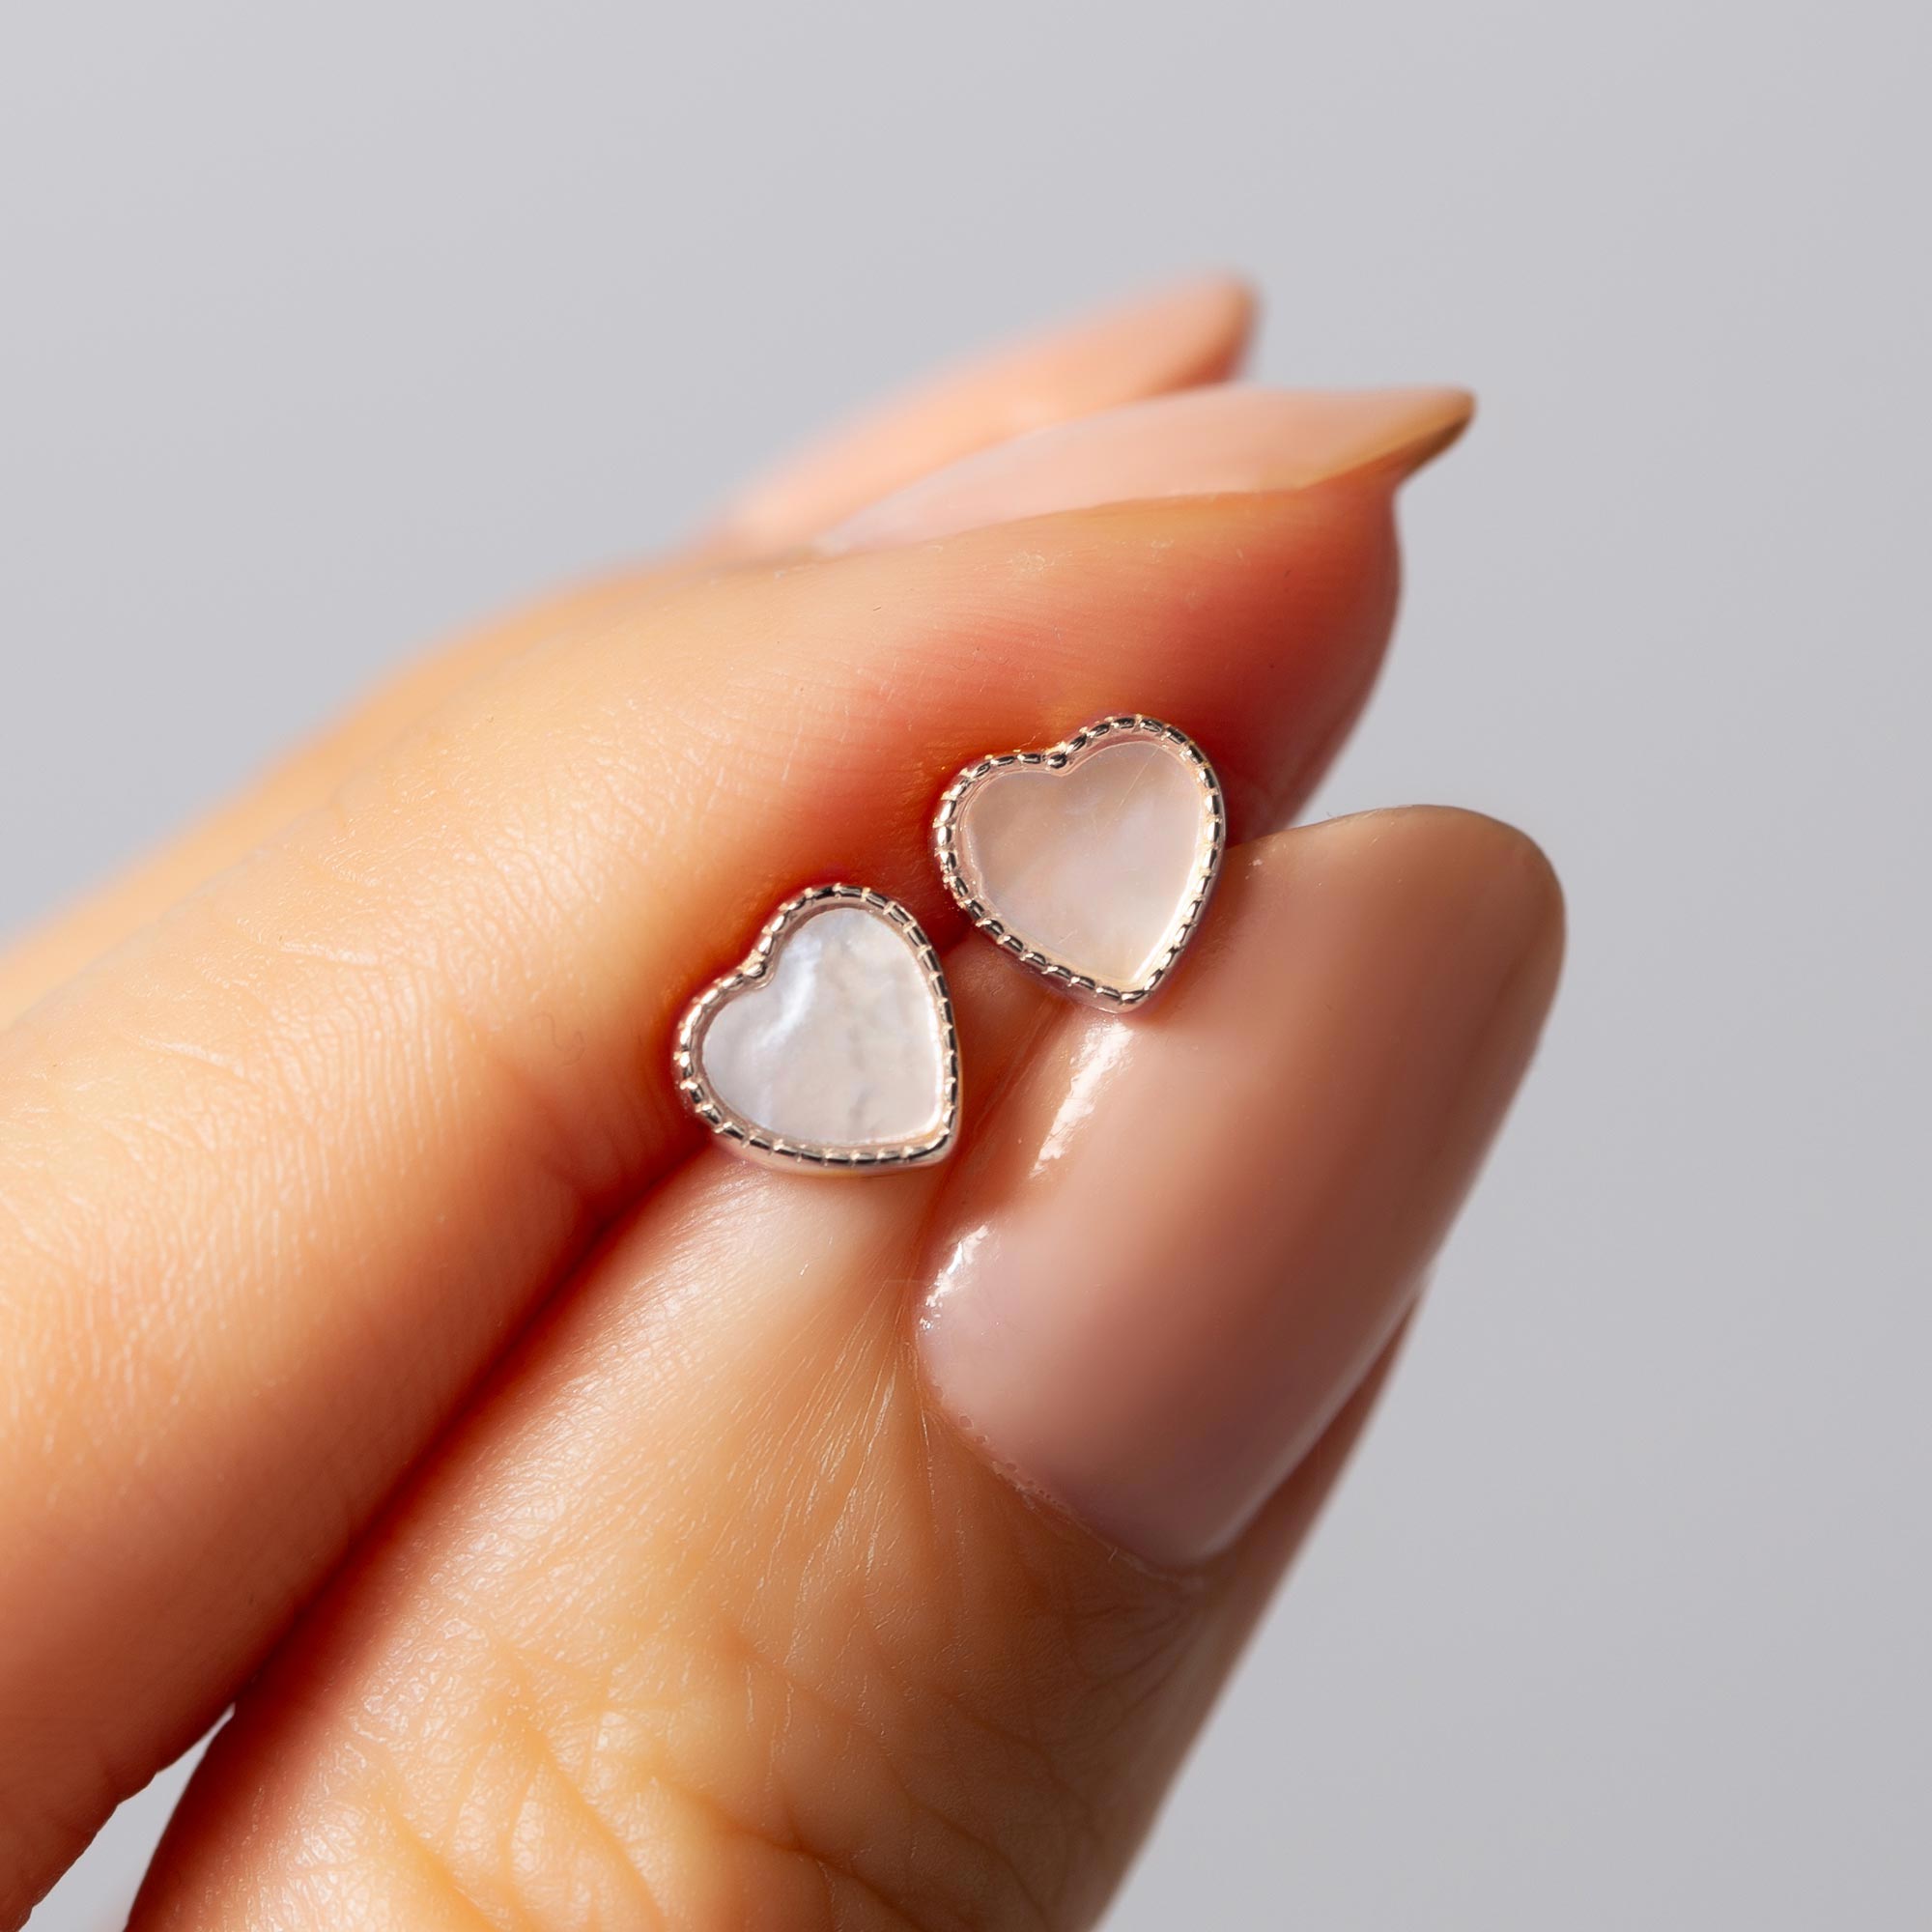 Mini Mother of Pearl Heart Studs